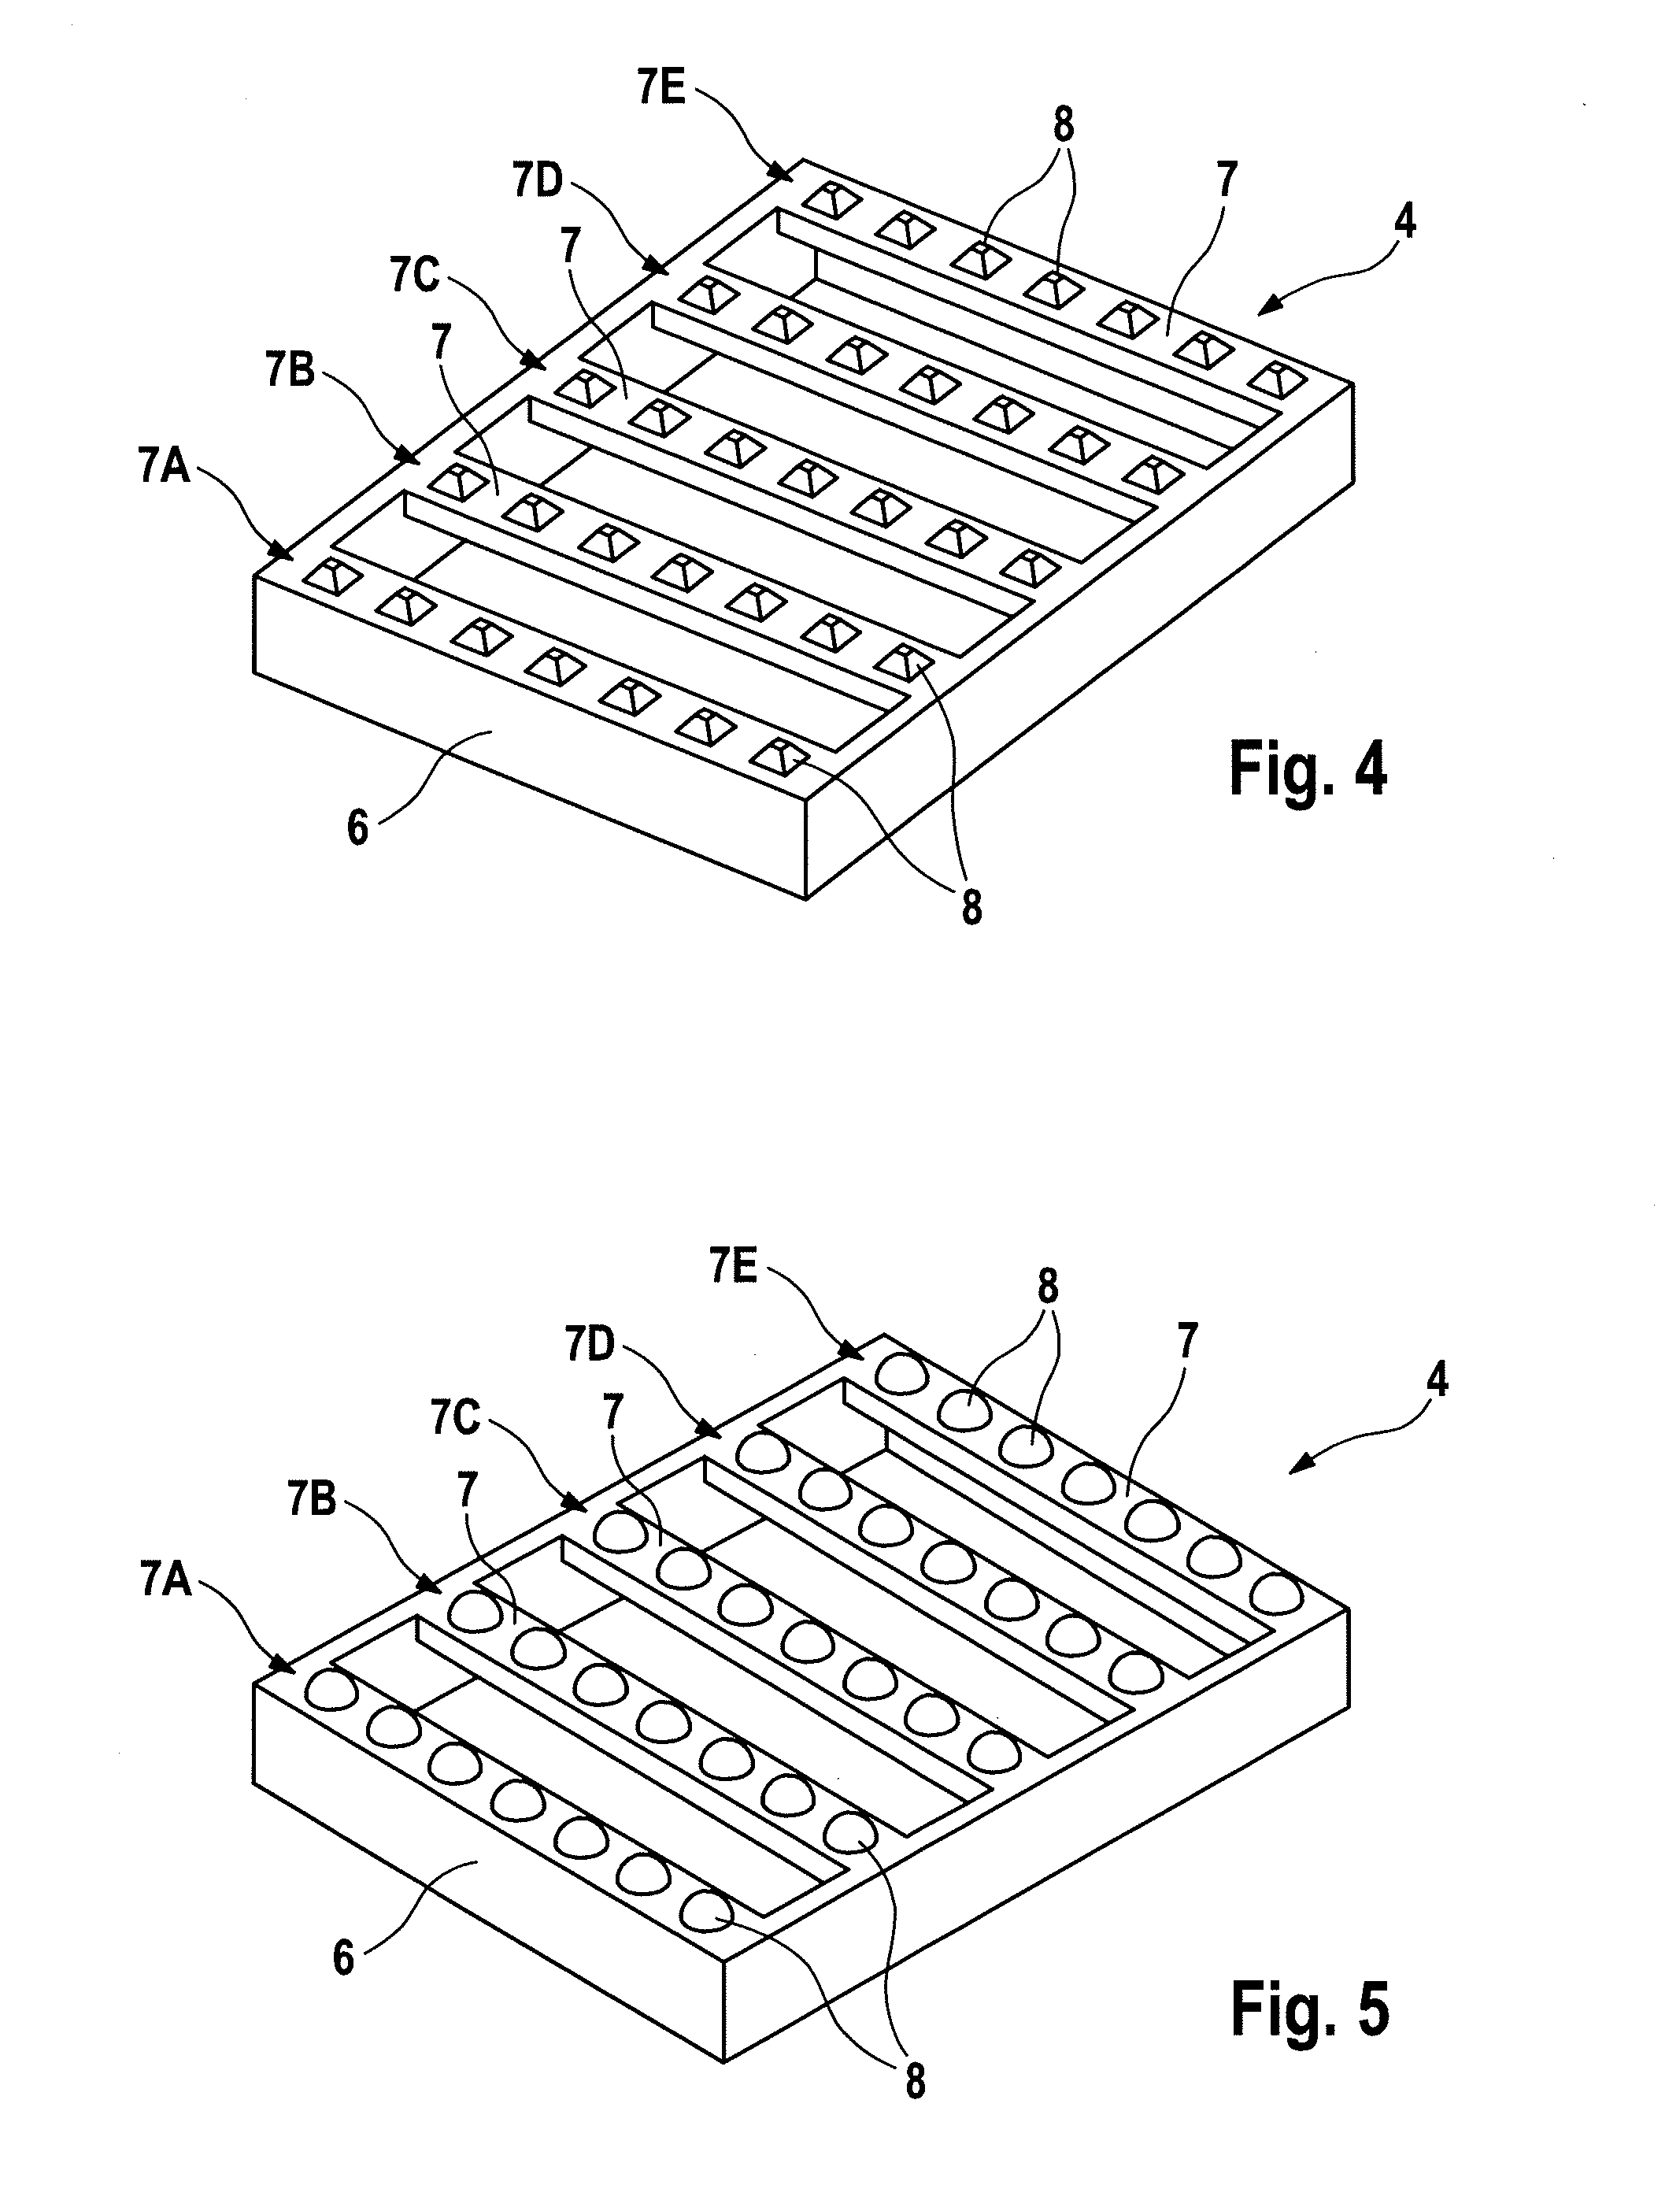 Method for the Manufacture of Double-Sided Metallized Ceramic Substrates